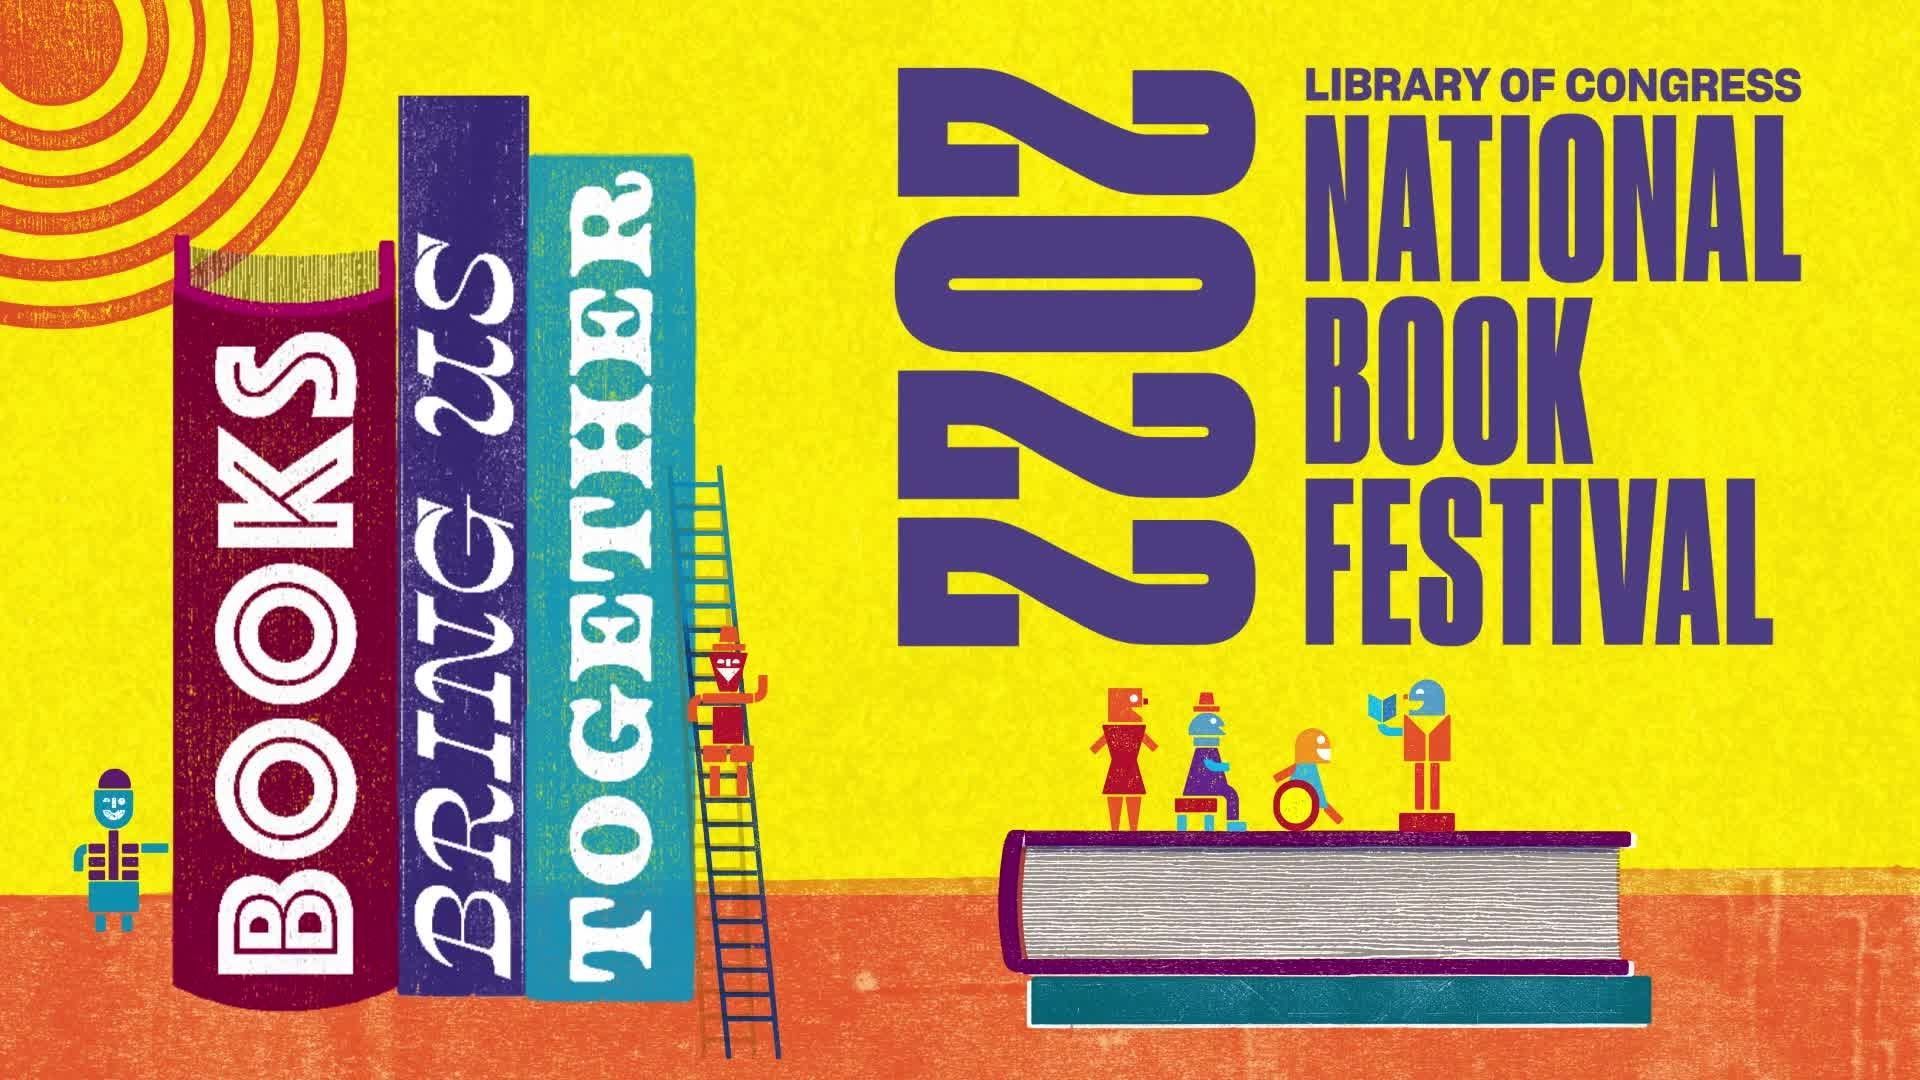 Library of Congress National Book Festival Partners With PBS Books to Feature Literary Voices from the Festival